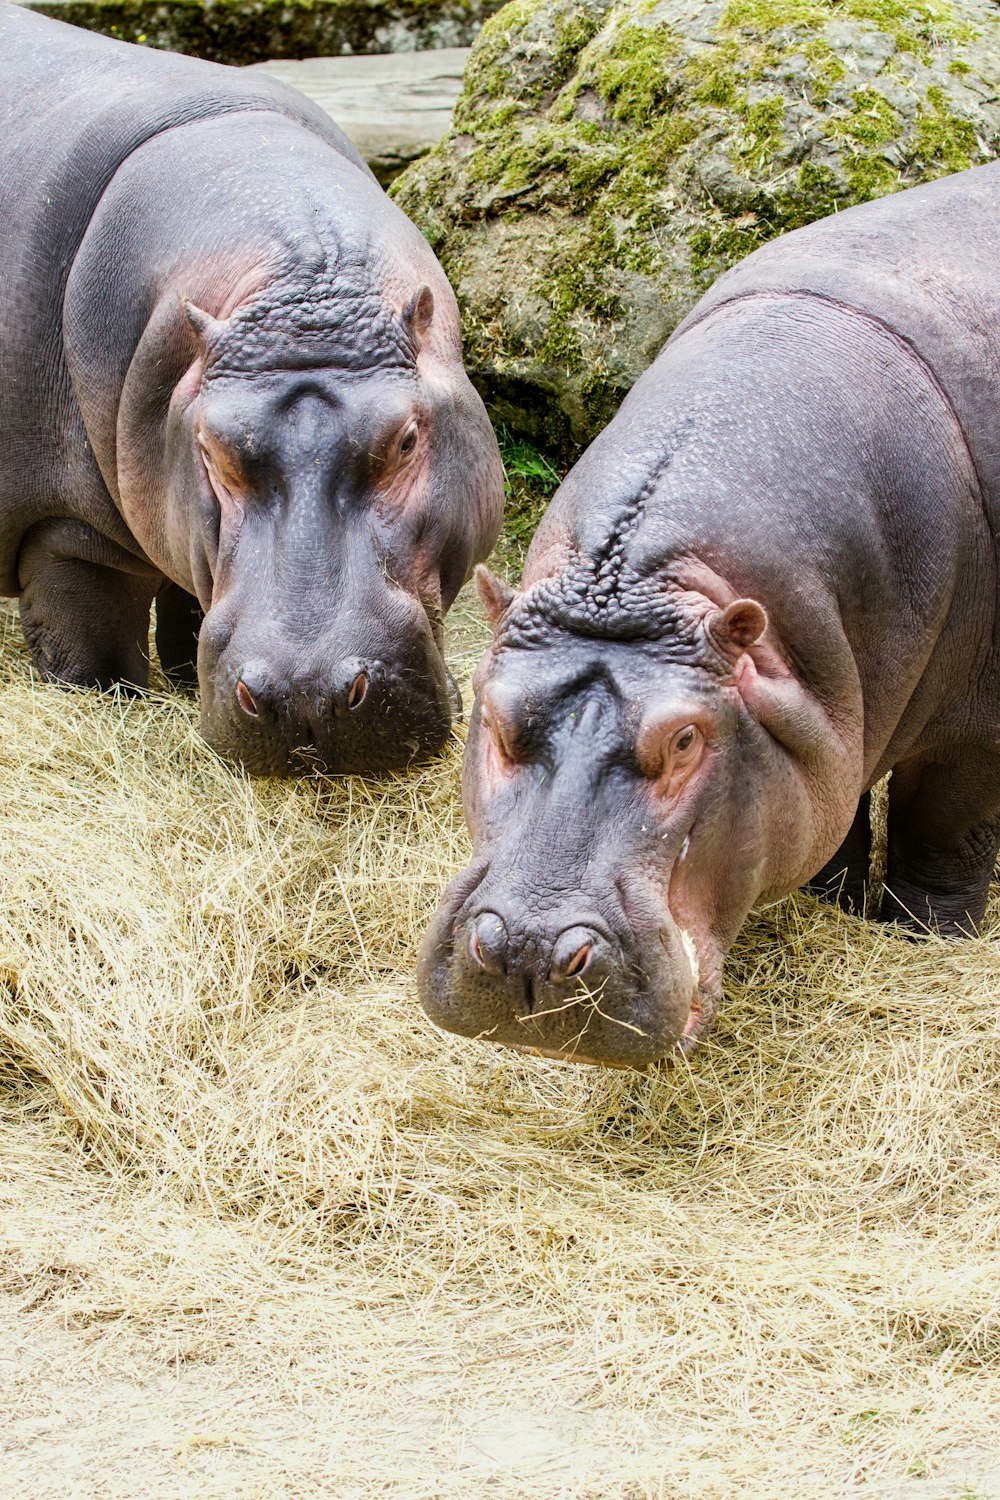 three hippos eating hay in a zoo enclosure